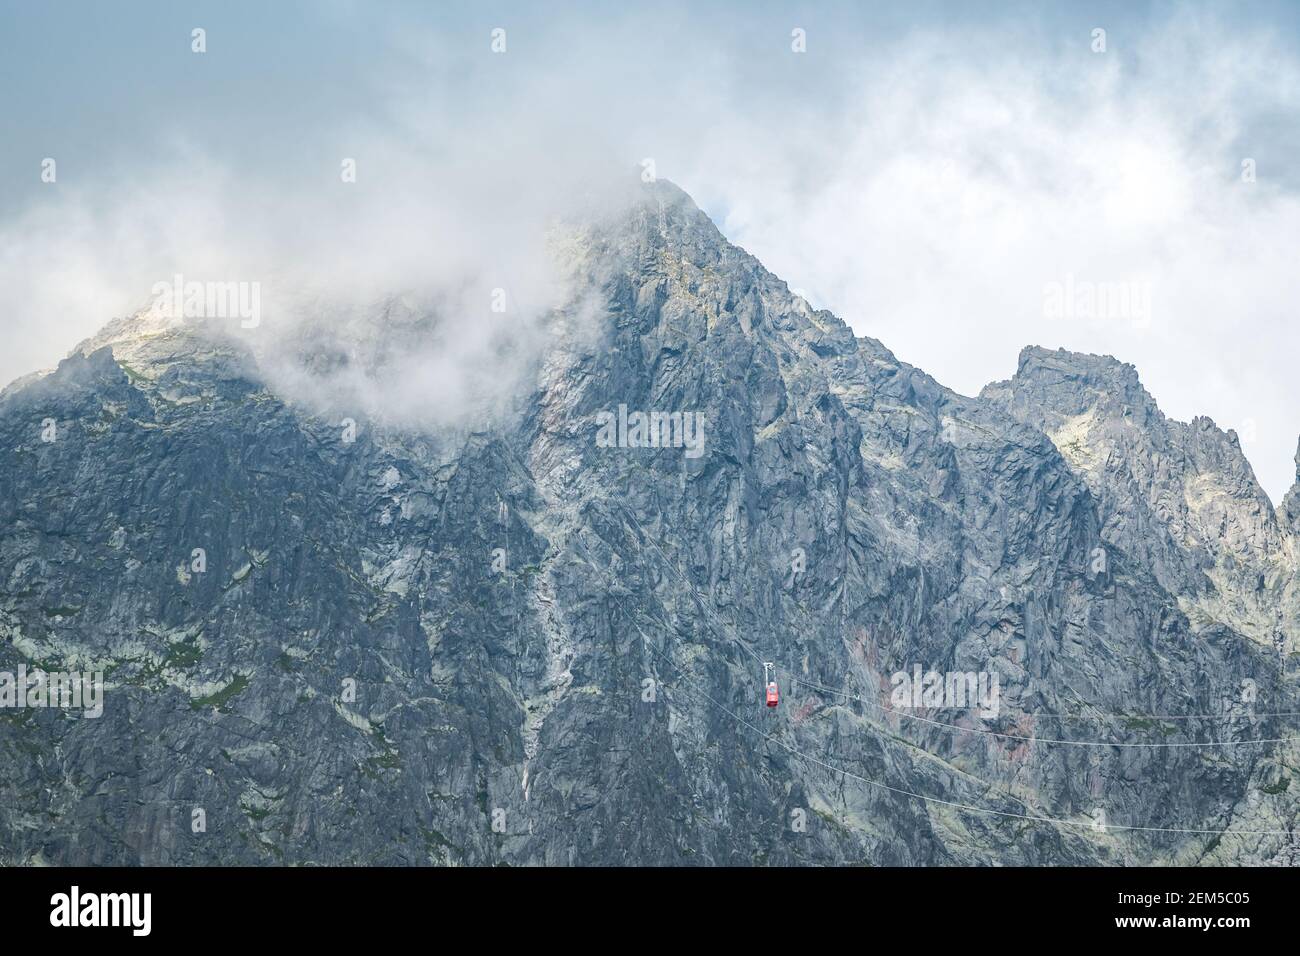 View of the Lomnicky stit peak, famous rocky summit in High Tatras, Slovakia. Cloudy windy day. Stock Photo